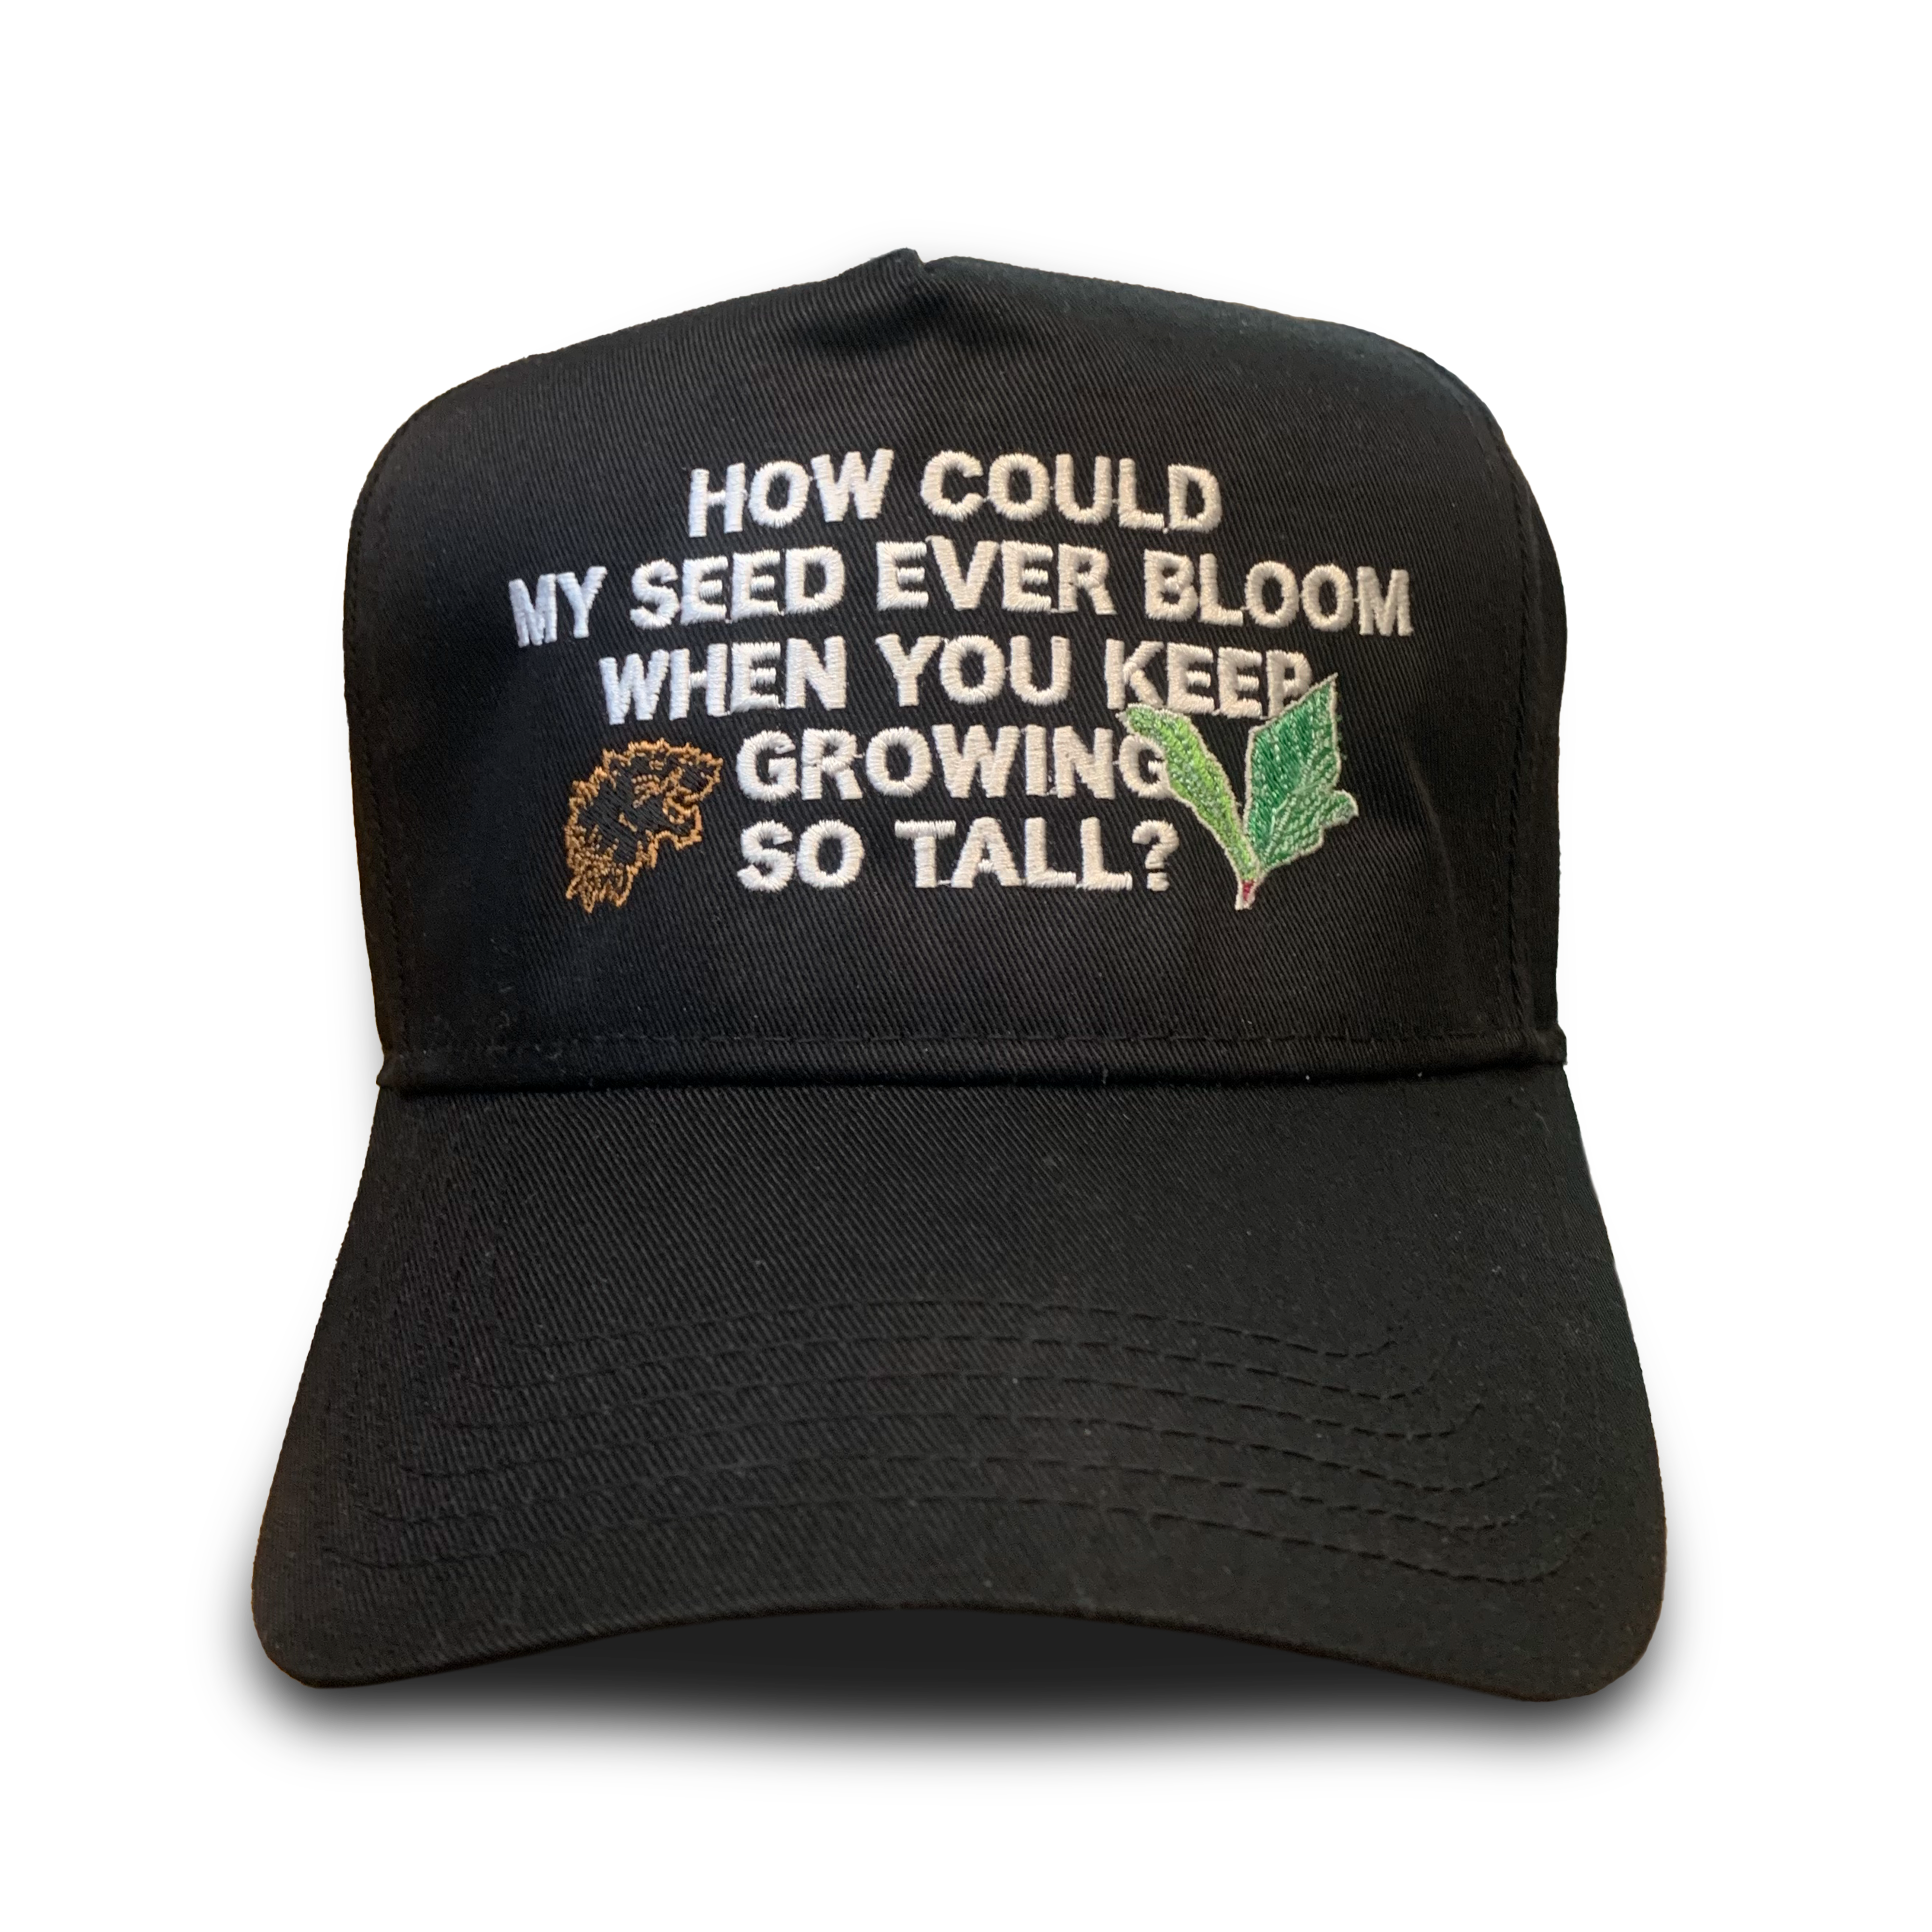 'MASK OF SANITY HAT'